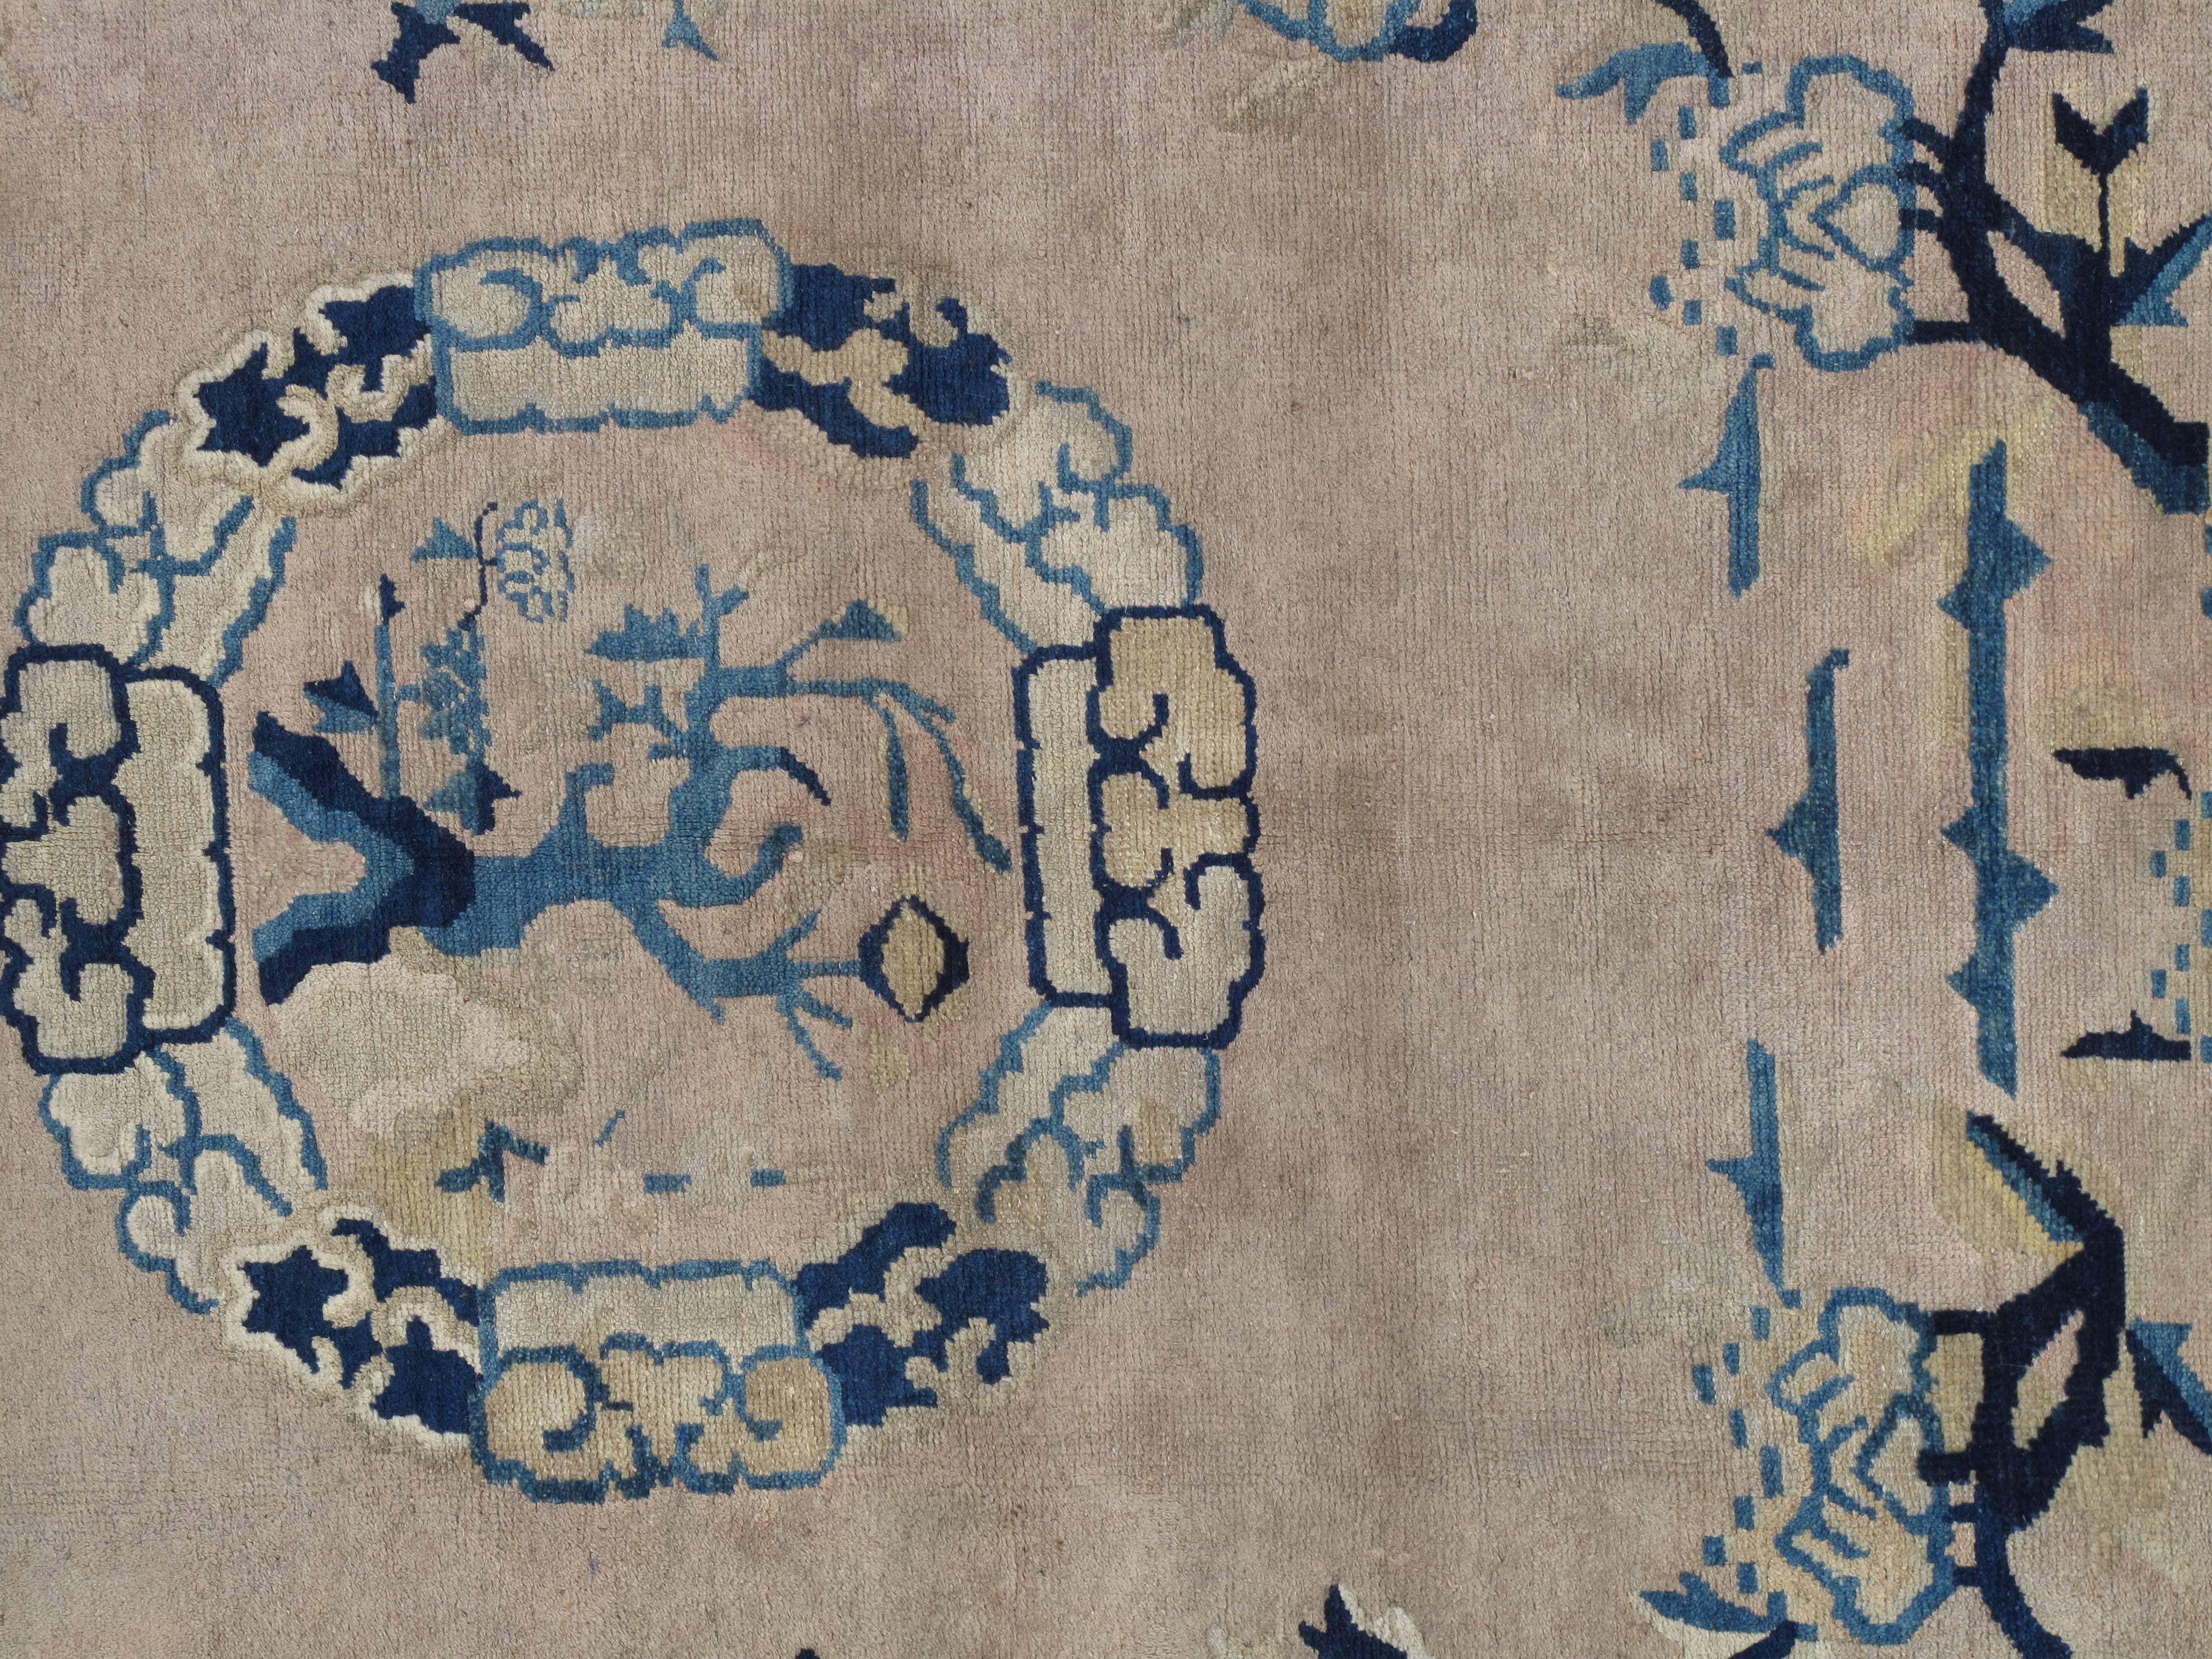 China has a long tradition of carpets and the original ones, probably used as merchandise, are dated at over 2000 years ago. The art of knotting carpets was however, introduced somewhere around the 15th century in China.
The patterns on some of the